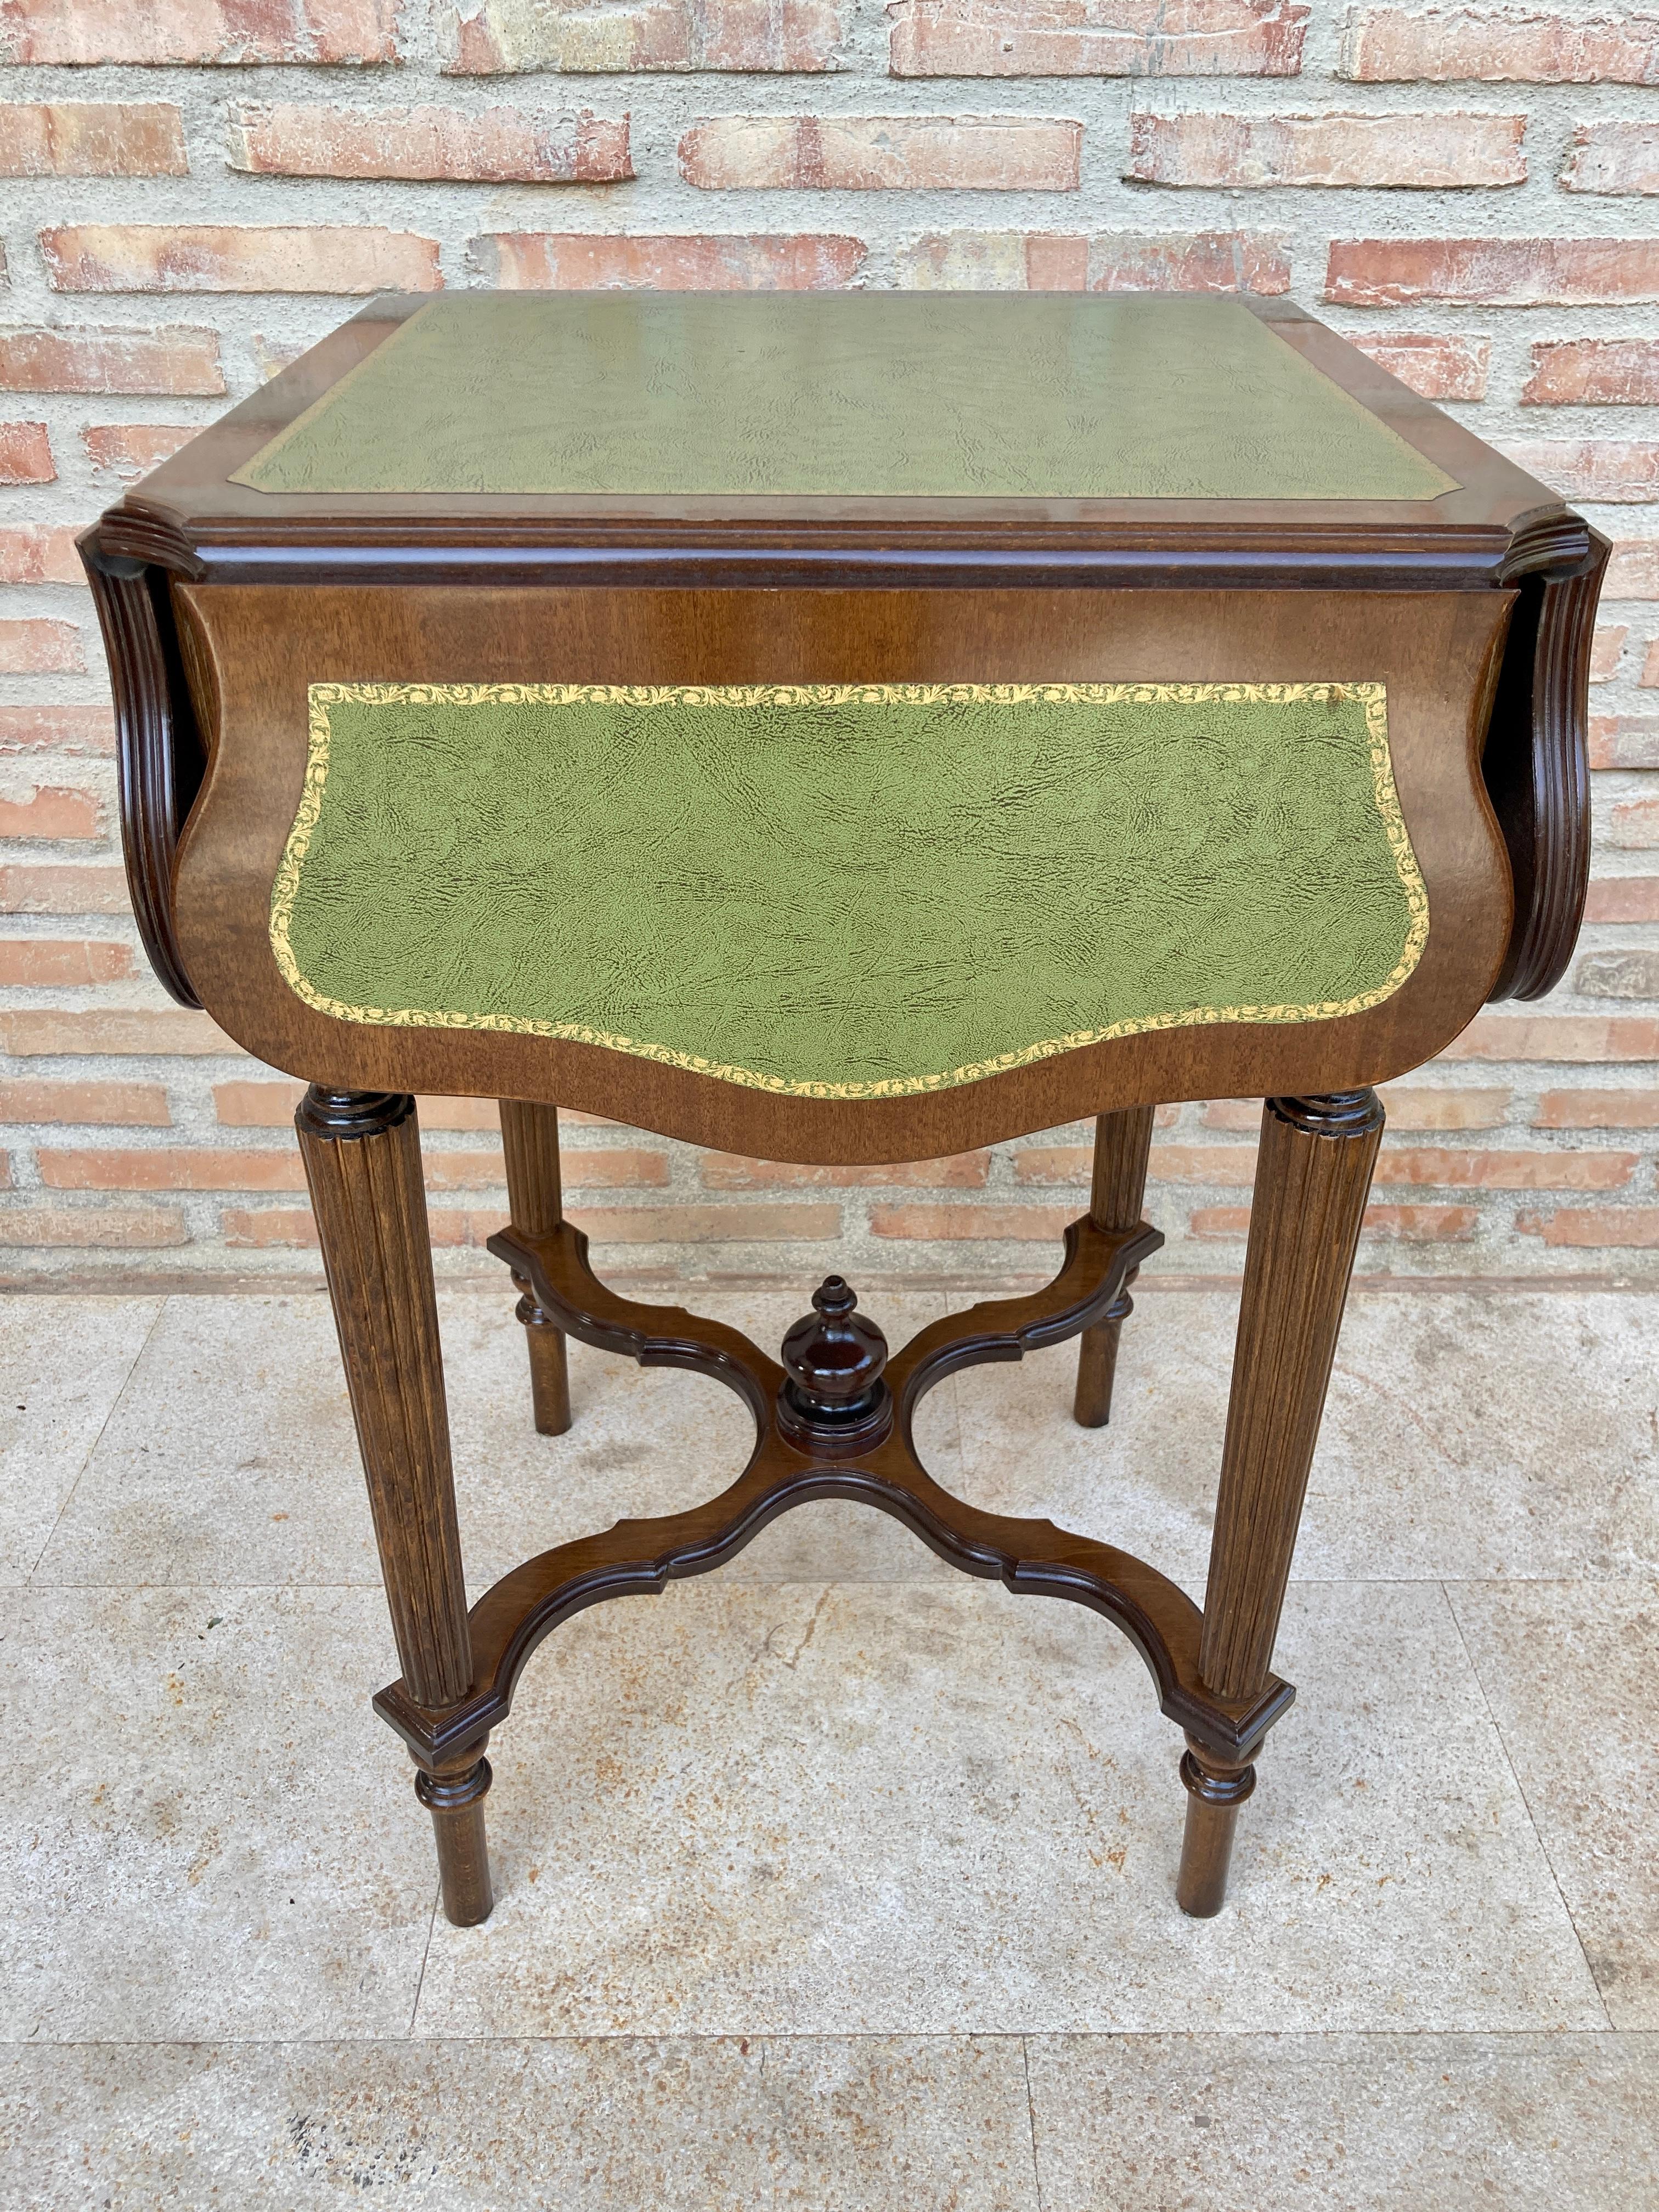 Old English Georgian style card table or game table. Antique wing side table with green baize. 

The table is foldable, its shape is square and it can be transformed into an elegant game table by unfolding its four wings, it has a drawer and four